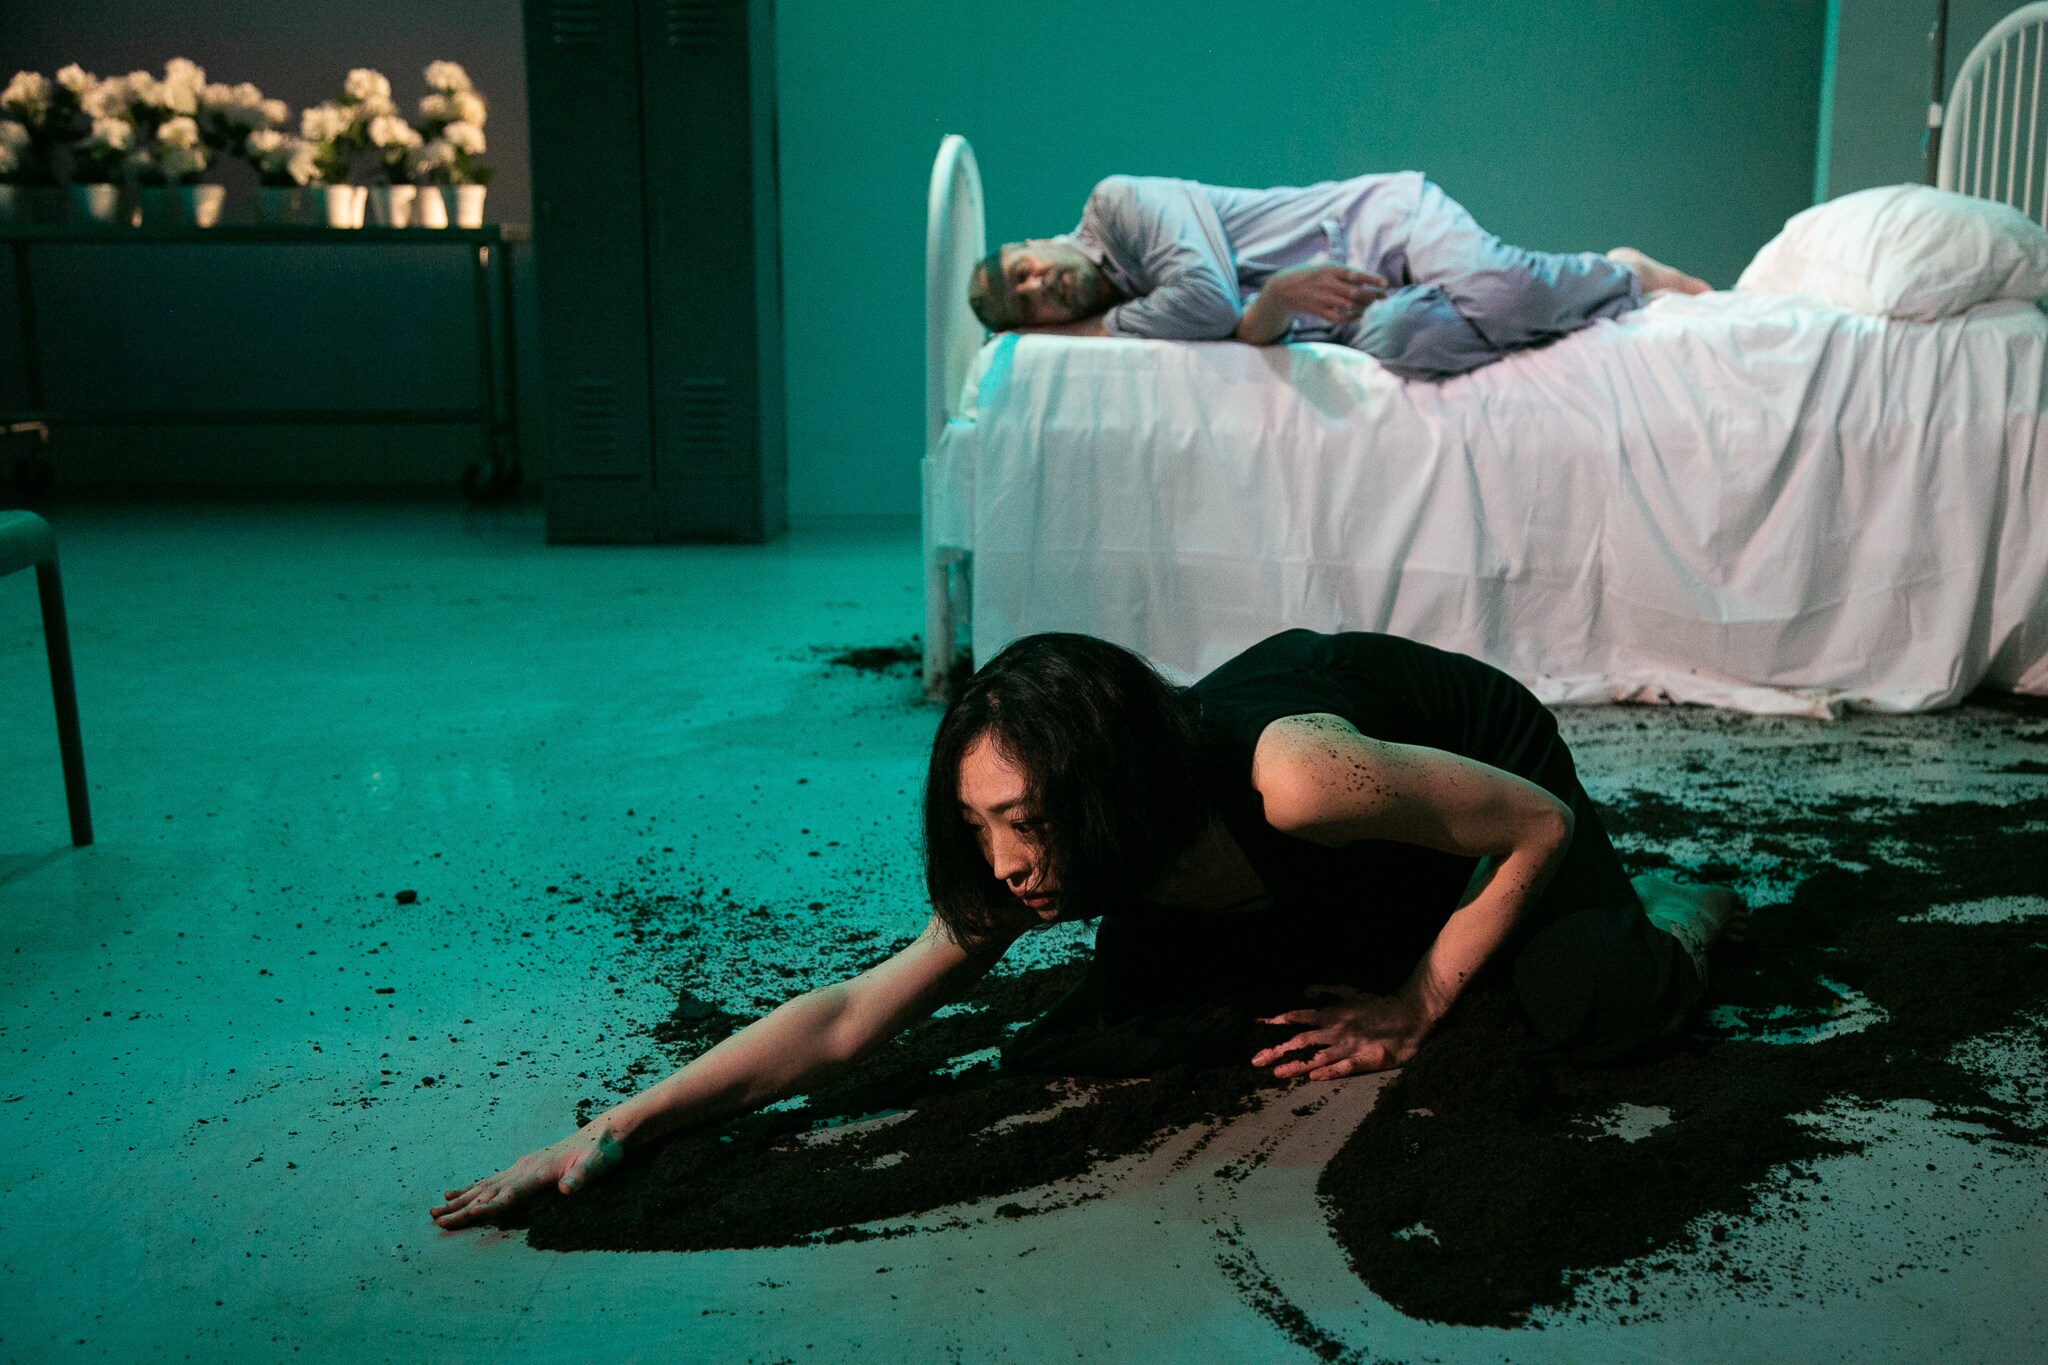 a man lying on a hospital bed with a woman in a black dress, spreading dirt on the floor